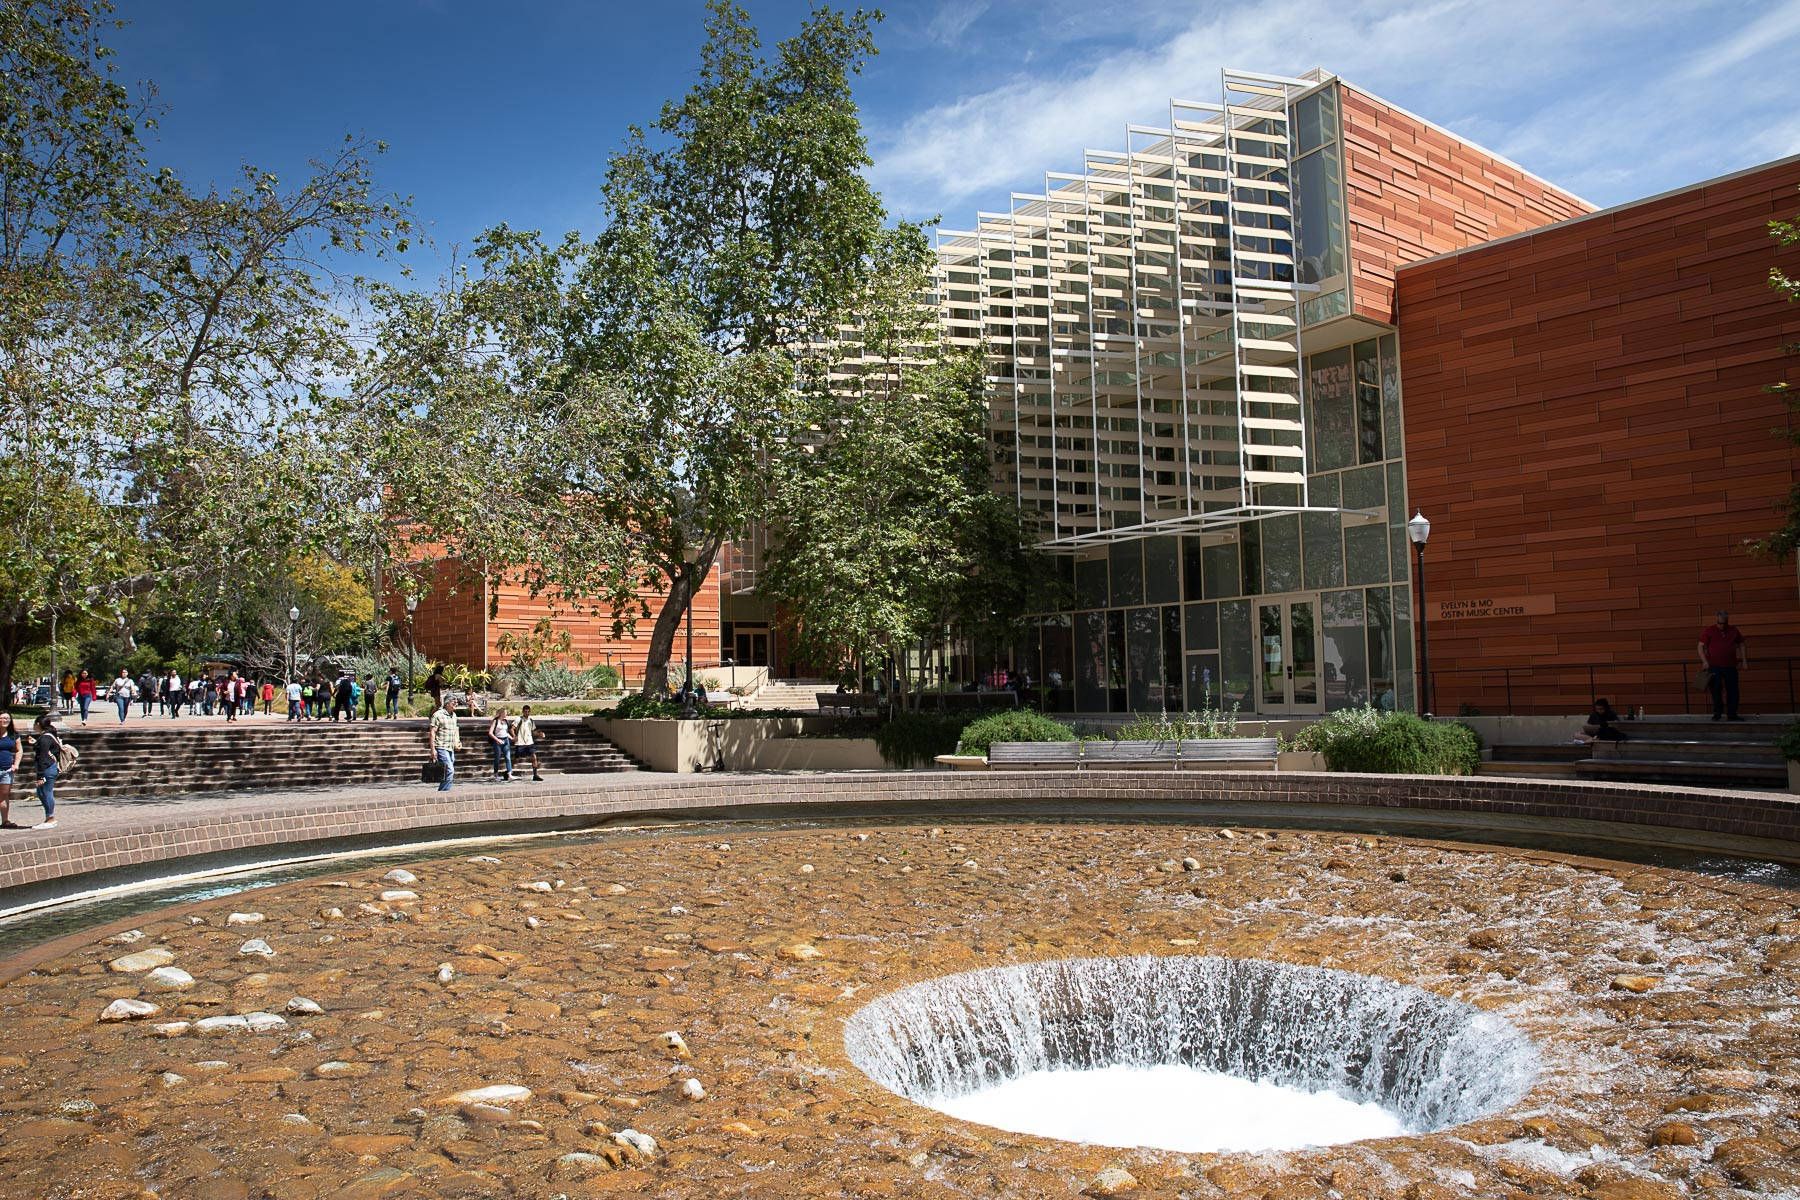 The iconic inverted fountain at UCLA Wallpaper